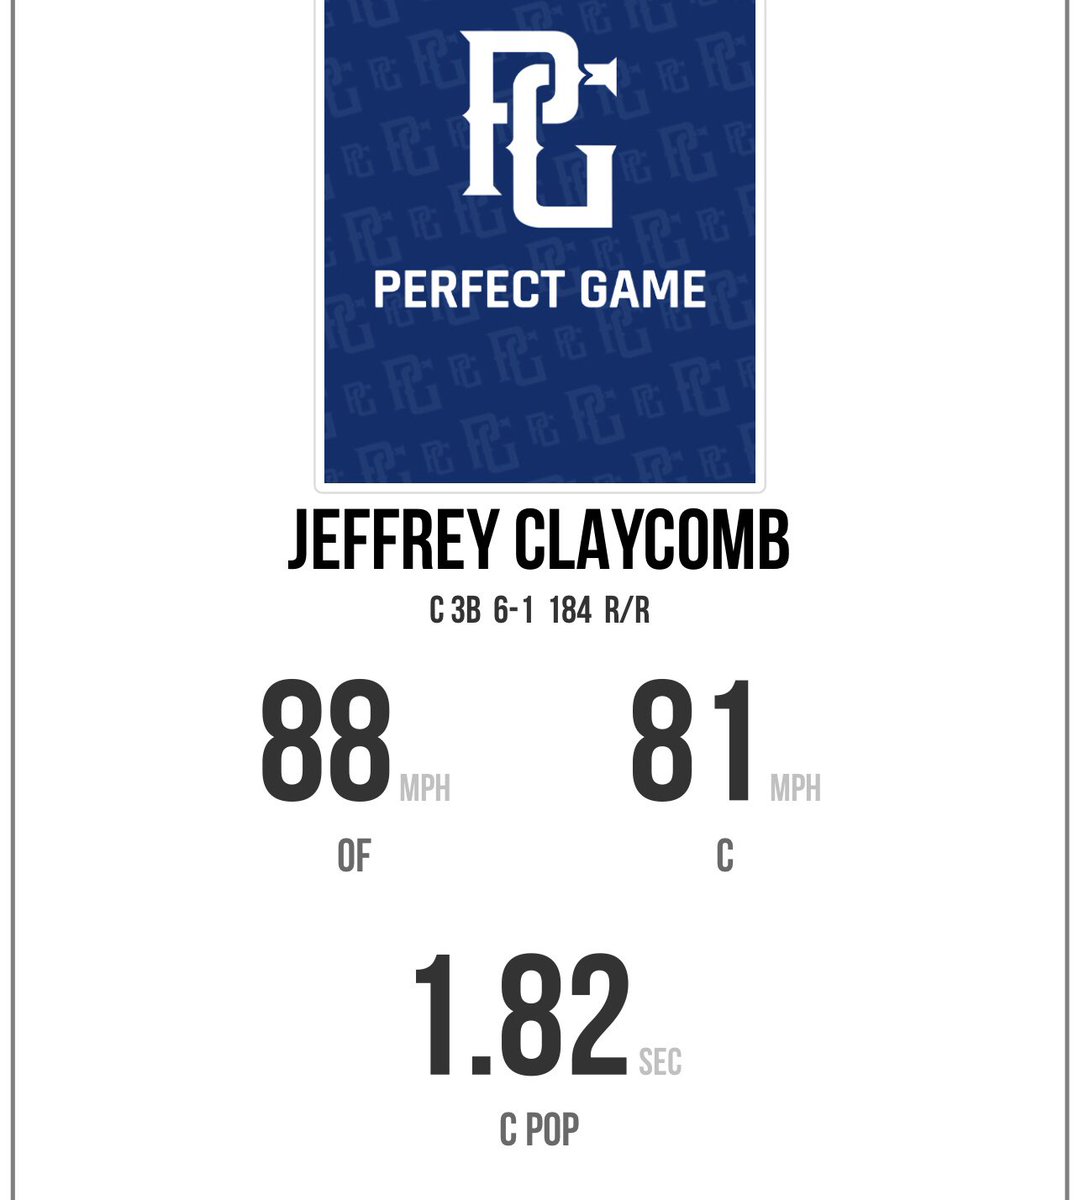 He had quite a great day today!!!💥💥 way to go @JClaycomb16